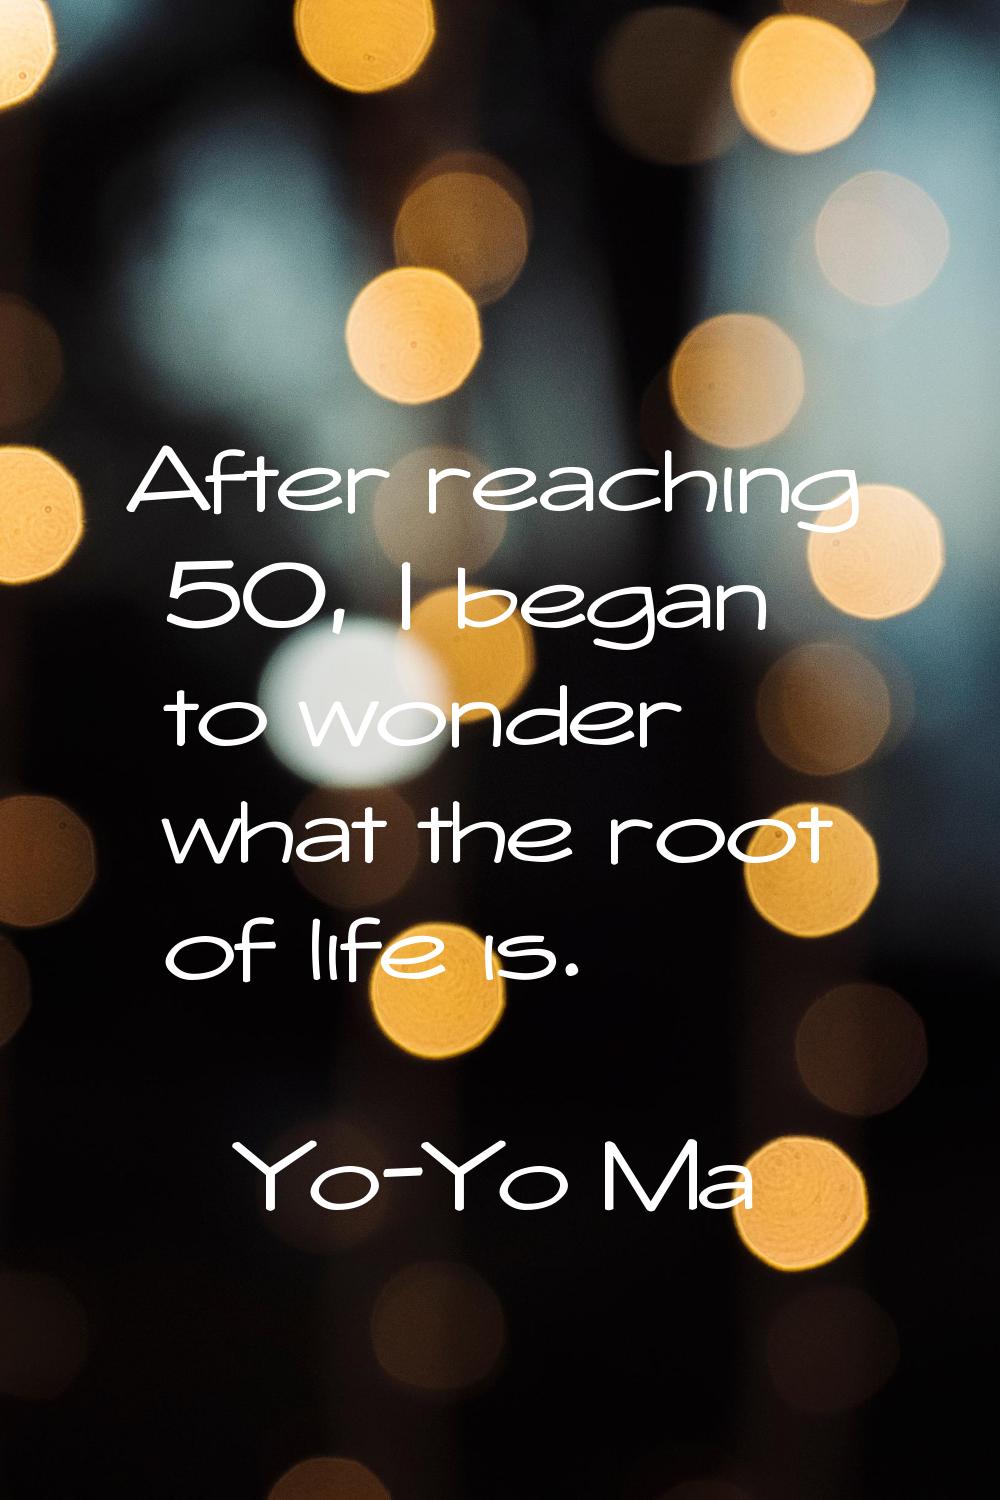 After reaching 50, I began to wonder what the root of life is.